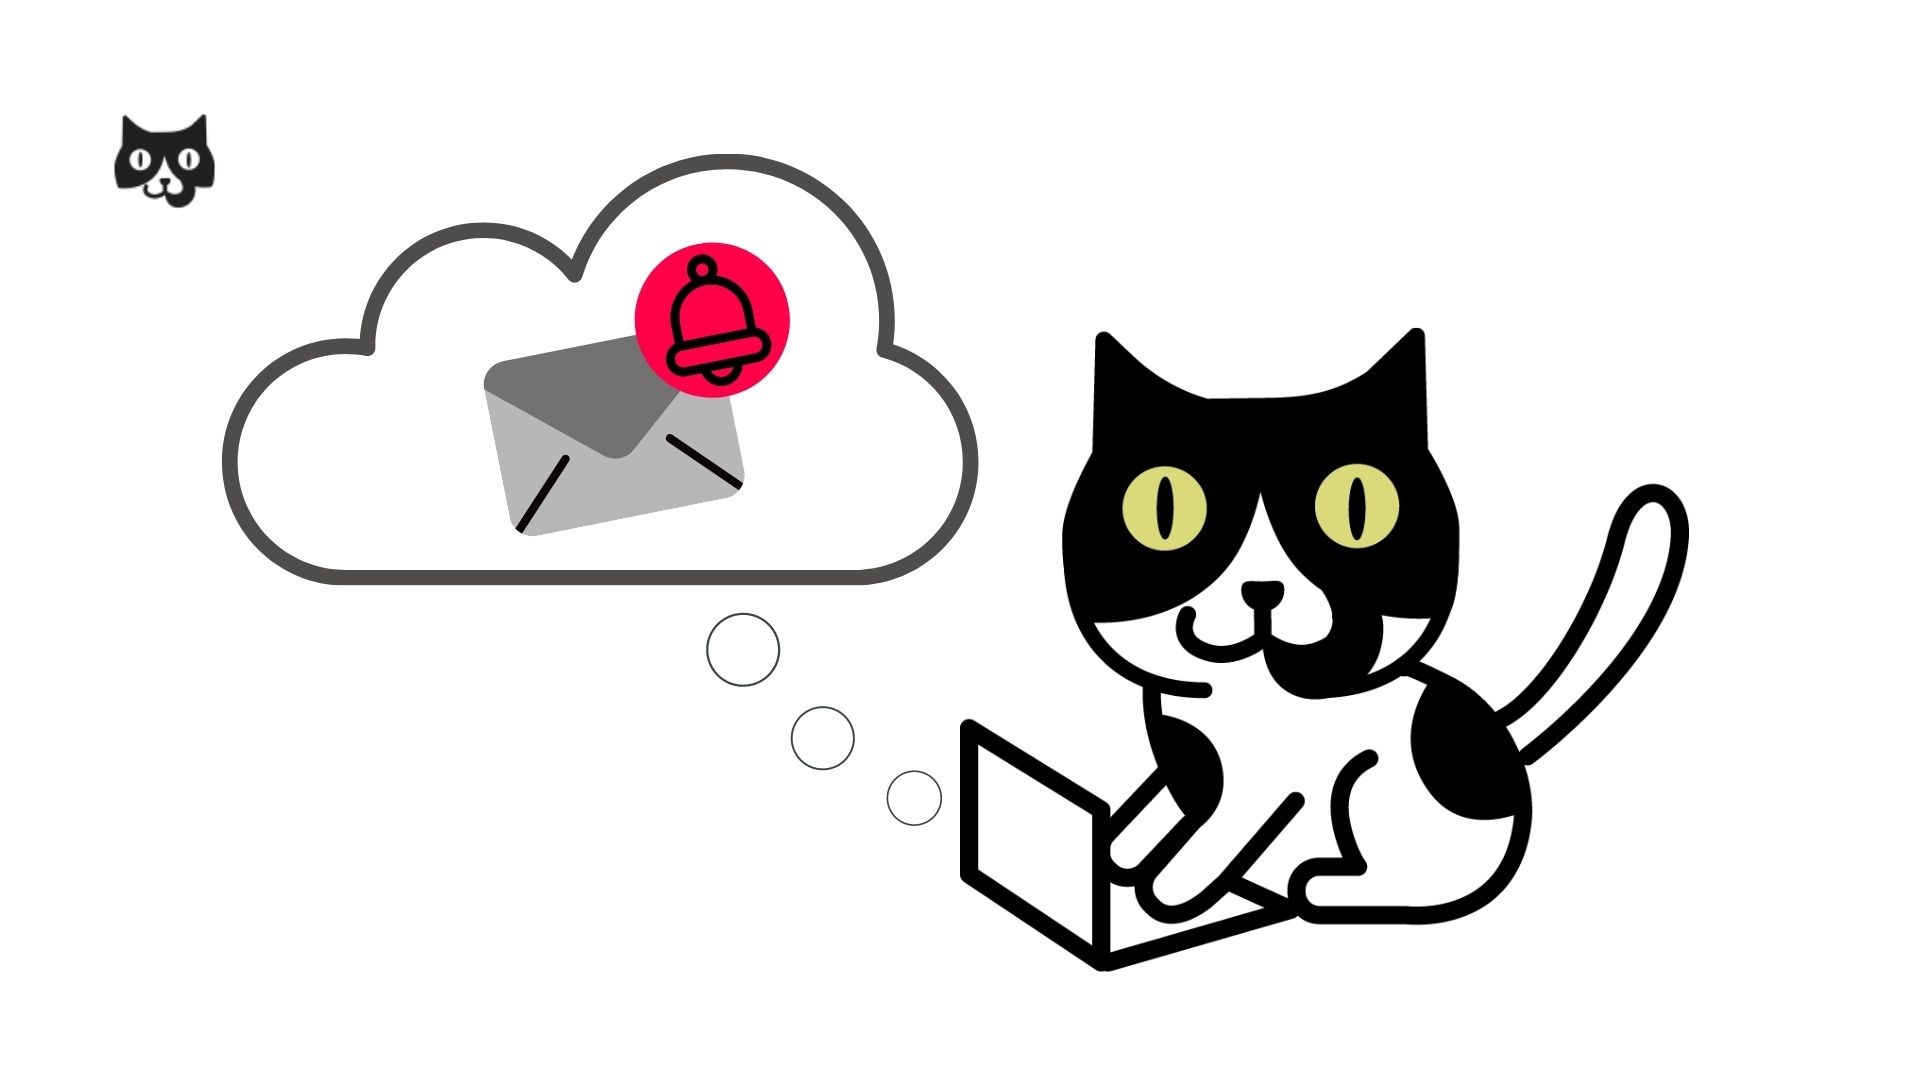 This photo shows Buddy, the Flying cat marketing mascot, on a laptop tracking his content marketing metrics. He is shows to have a cloud bubble coming from his computer, with a letter icon and notifications over it.This visualizes the email engagement rate as a content marketing metric